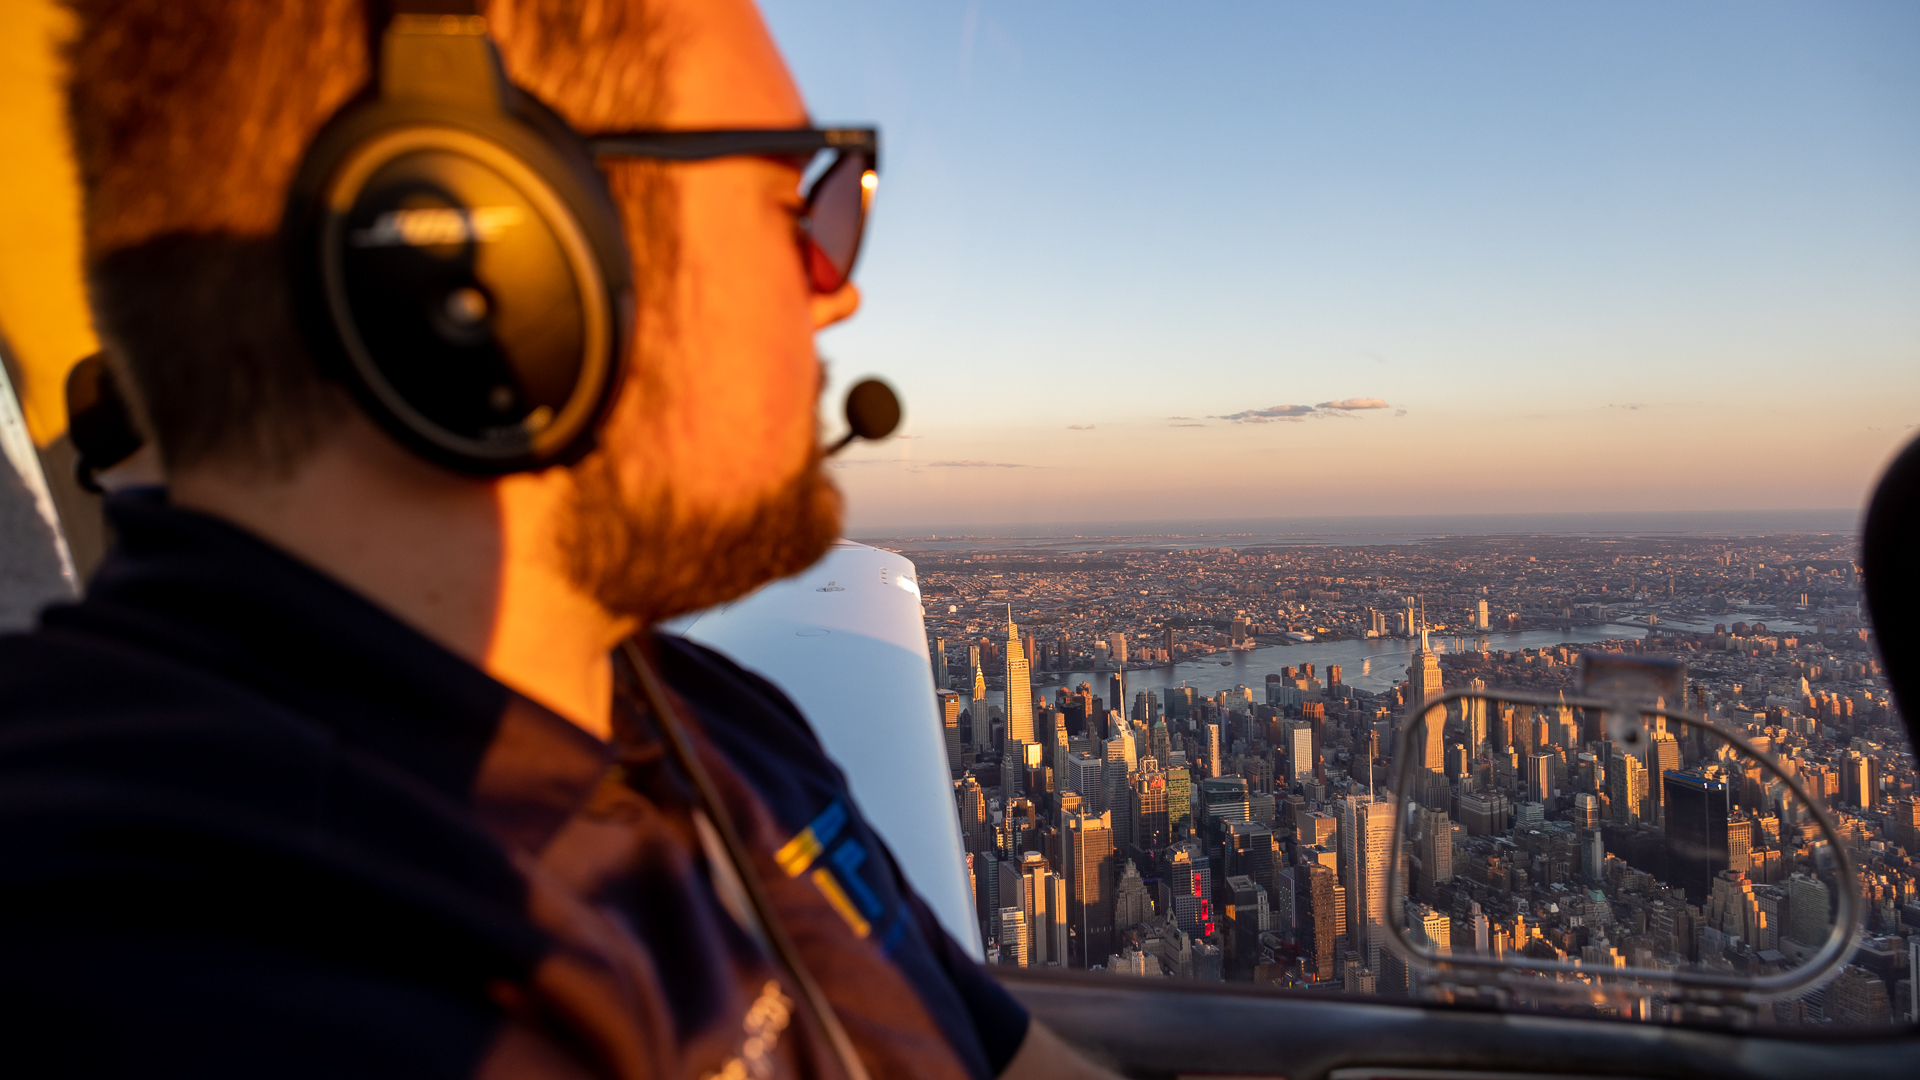 Learn To Fly – NYC Air Service, learn fly 